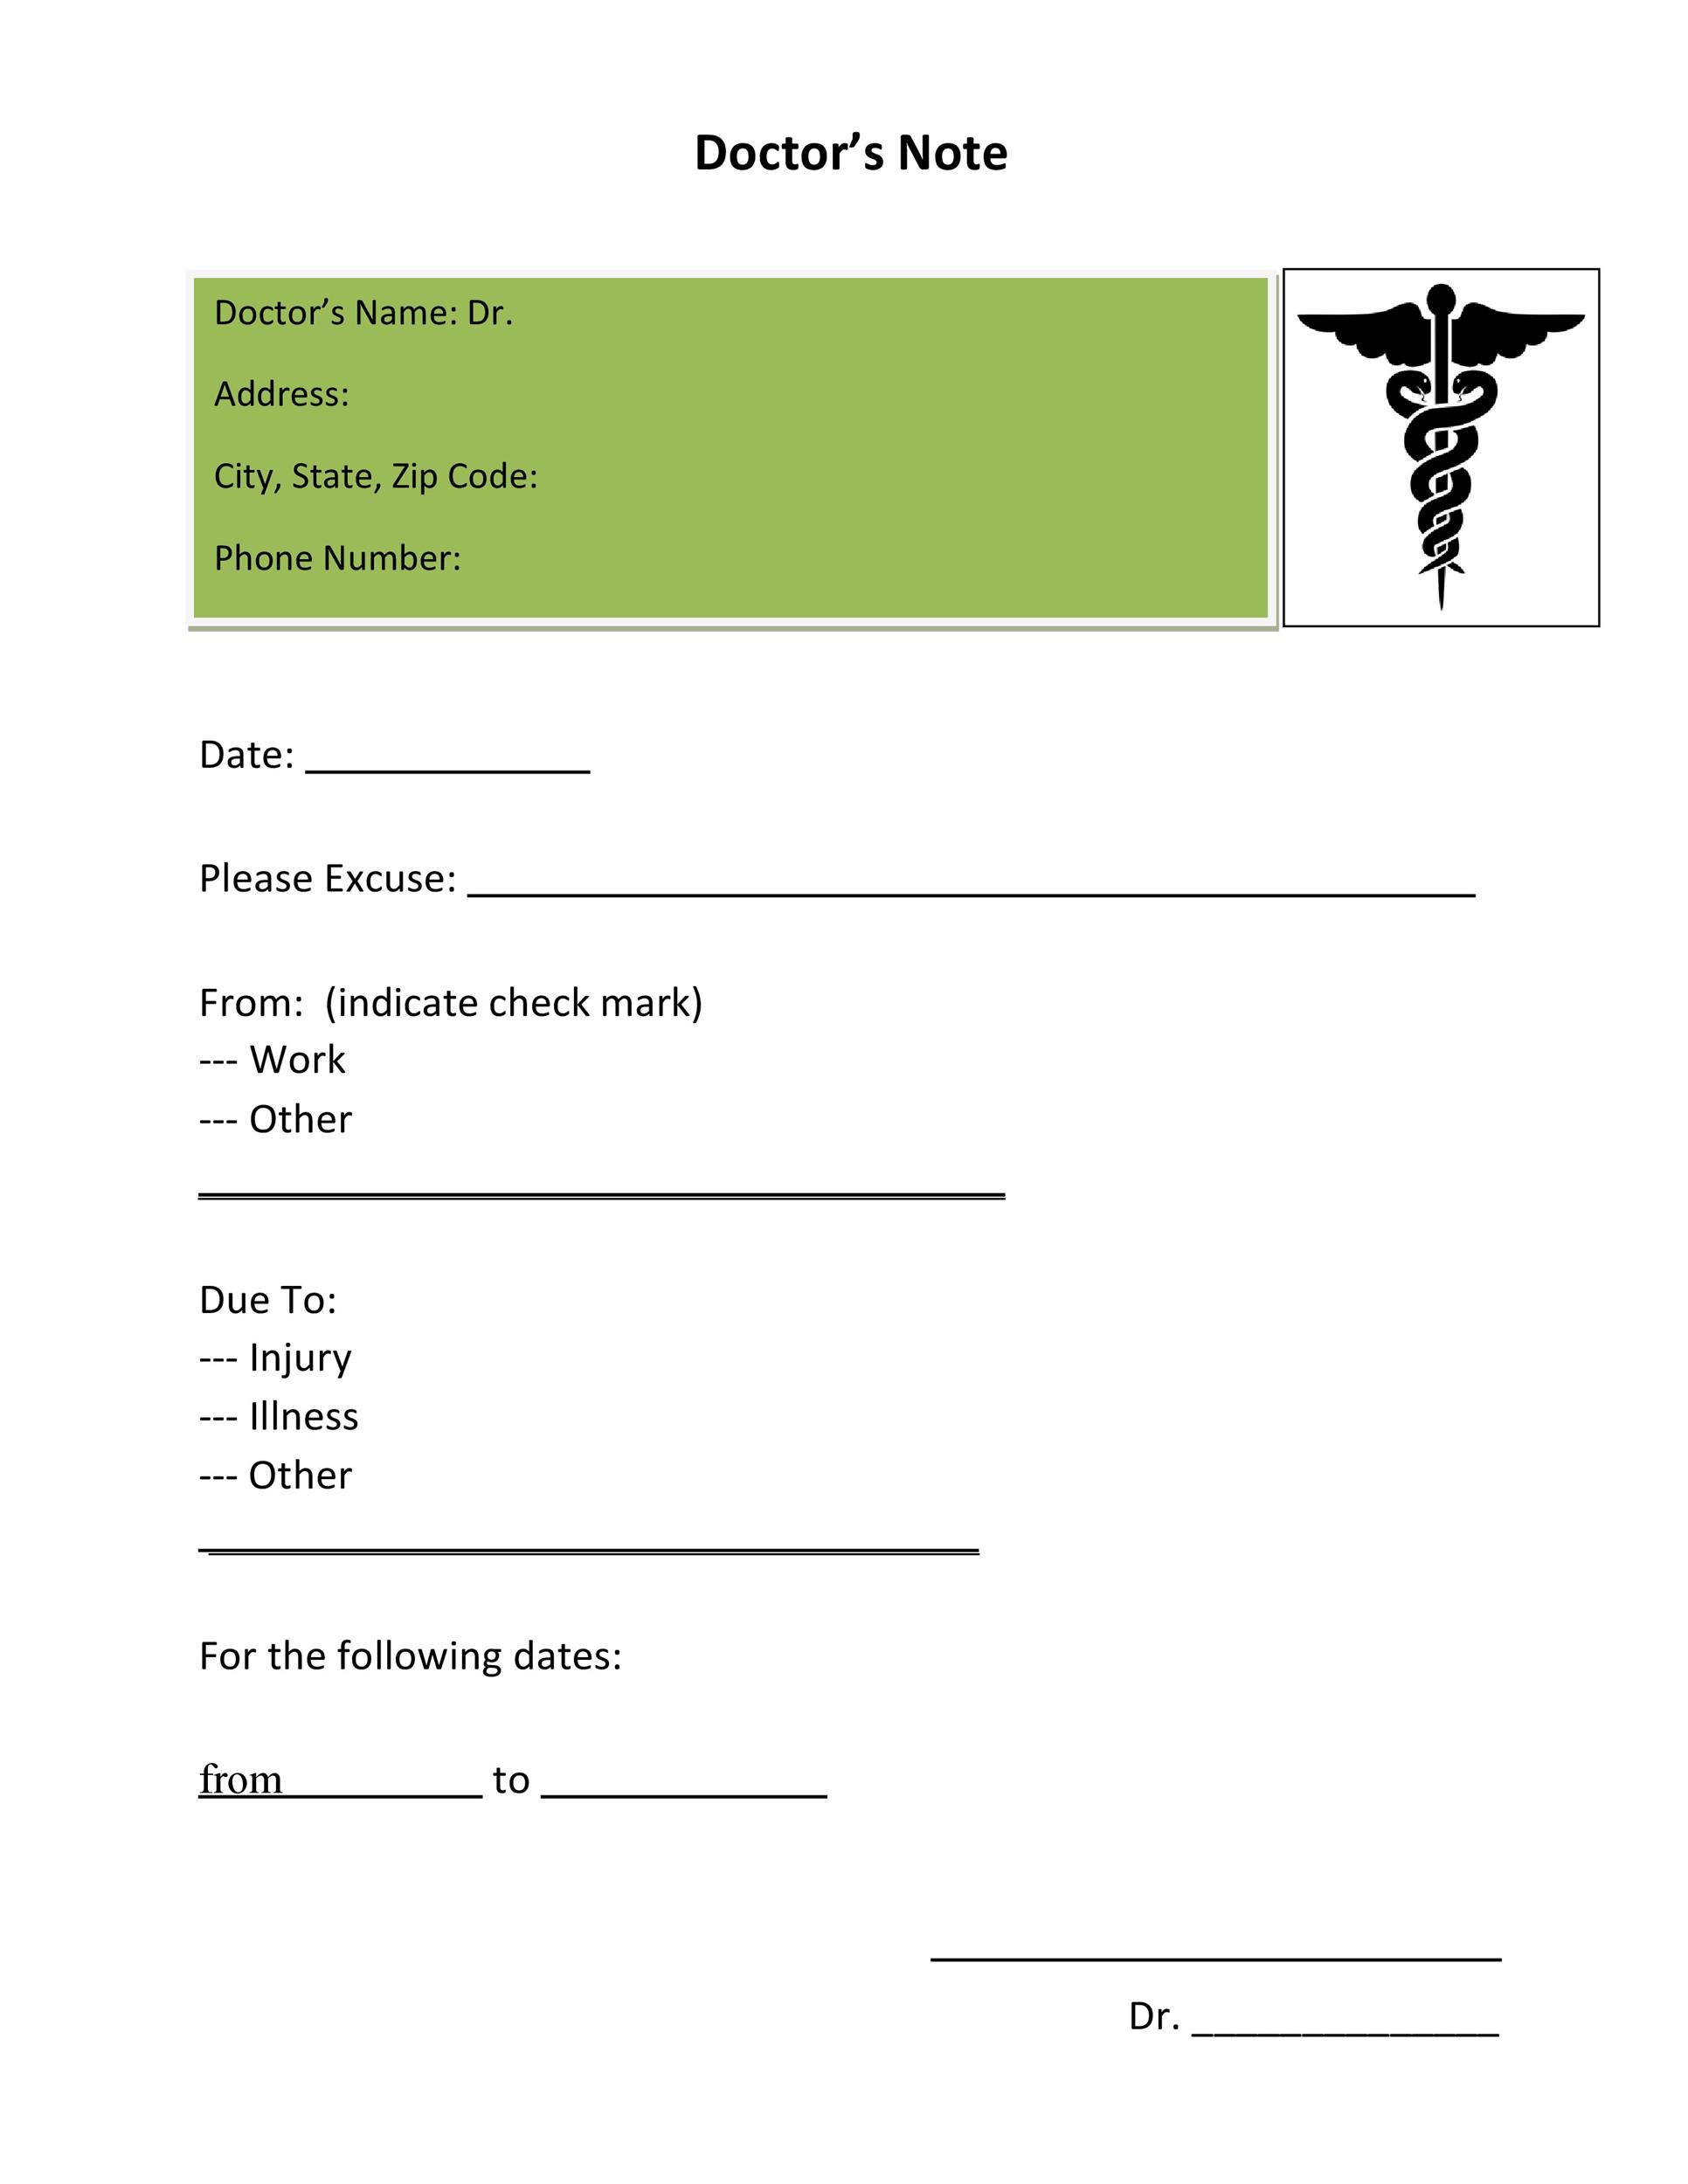 25 Free Doctor Note Excuse Templates ᐅ Templatelab